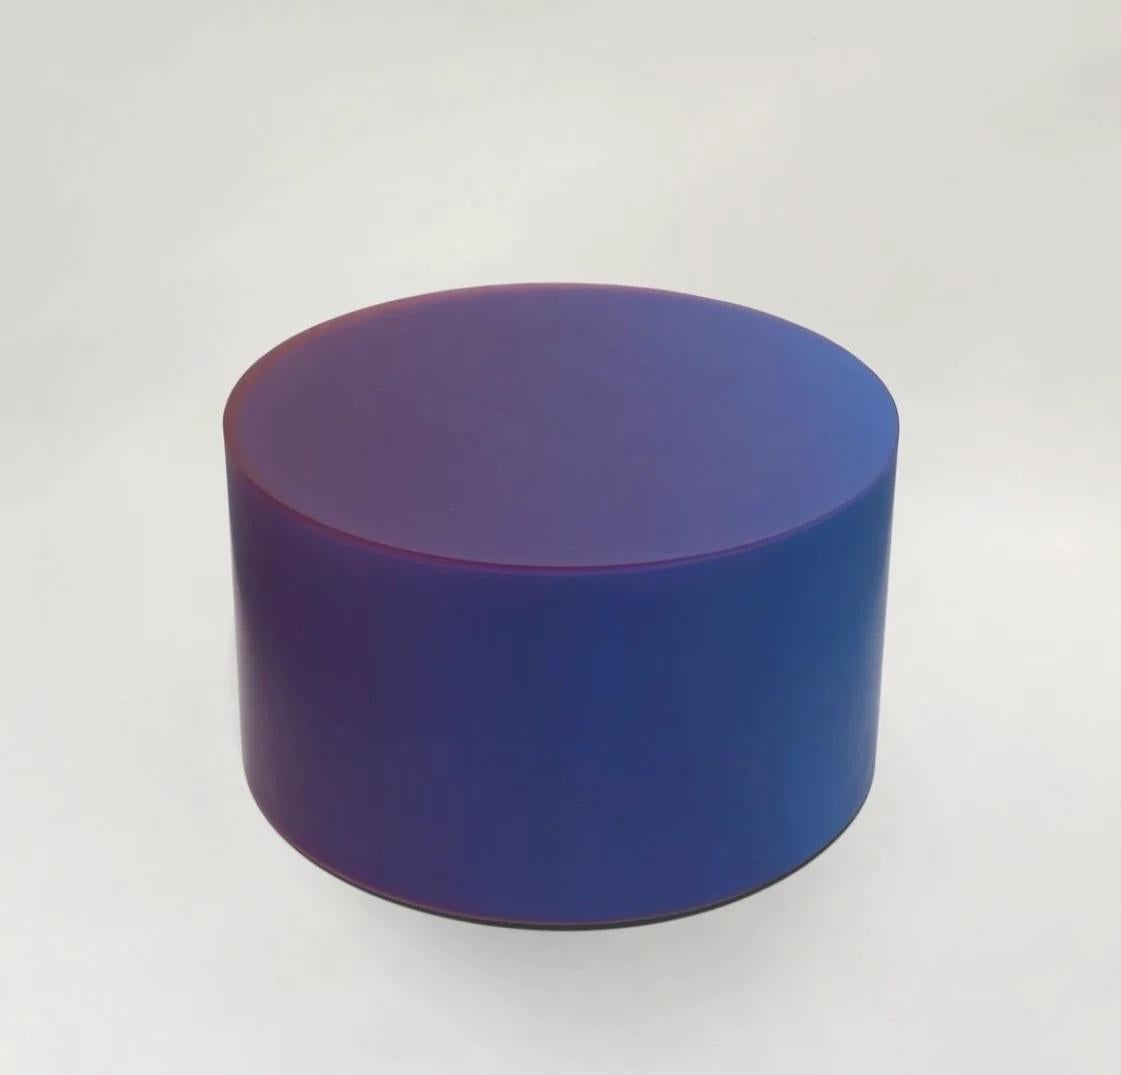 Modern OFFSET SHIFT Resin Coffee Table in Purple-Blue by Facture REP by Tuleste Factory For Sale